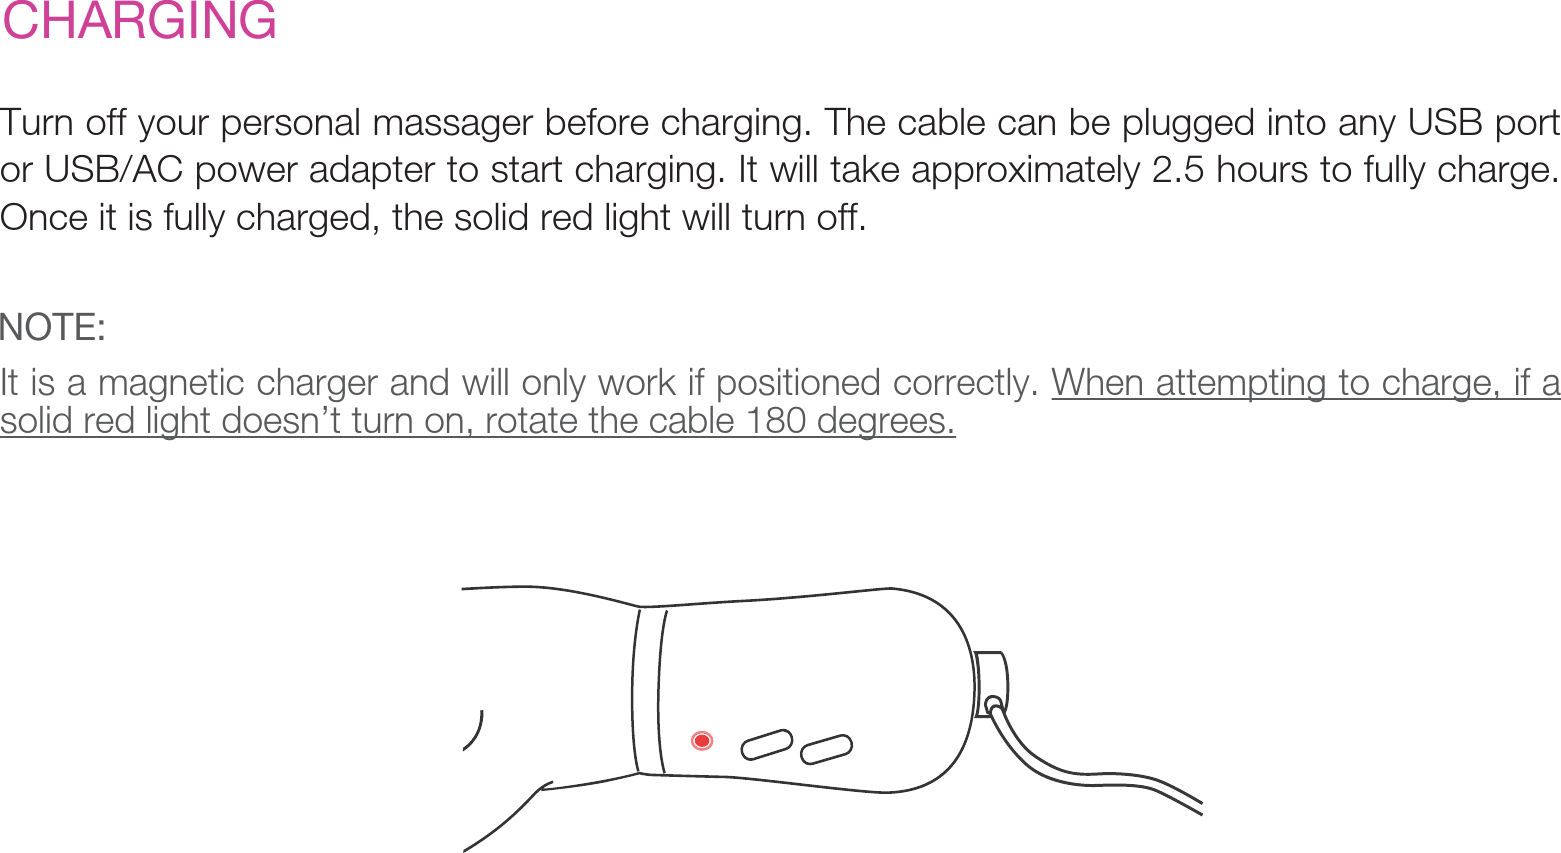 CHARGINGTurn off your personal massager before charging. The cable can be plugged into any USB port or USB/AC power adapter to start charging. It will take approximately 2.5 hours to fully charge. Once it is fully charged, the solid red light will turn off. It is a magnetic charger and will only work if positioned correctly. When attempting to charge, if a solid red light doesn’t turn on, rotate the cable 180 degrees.NOTE: 